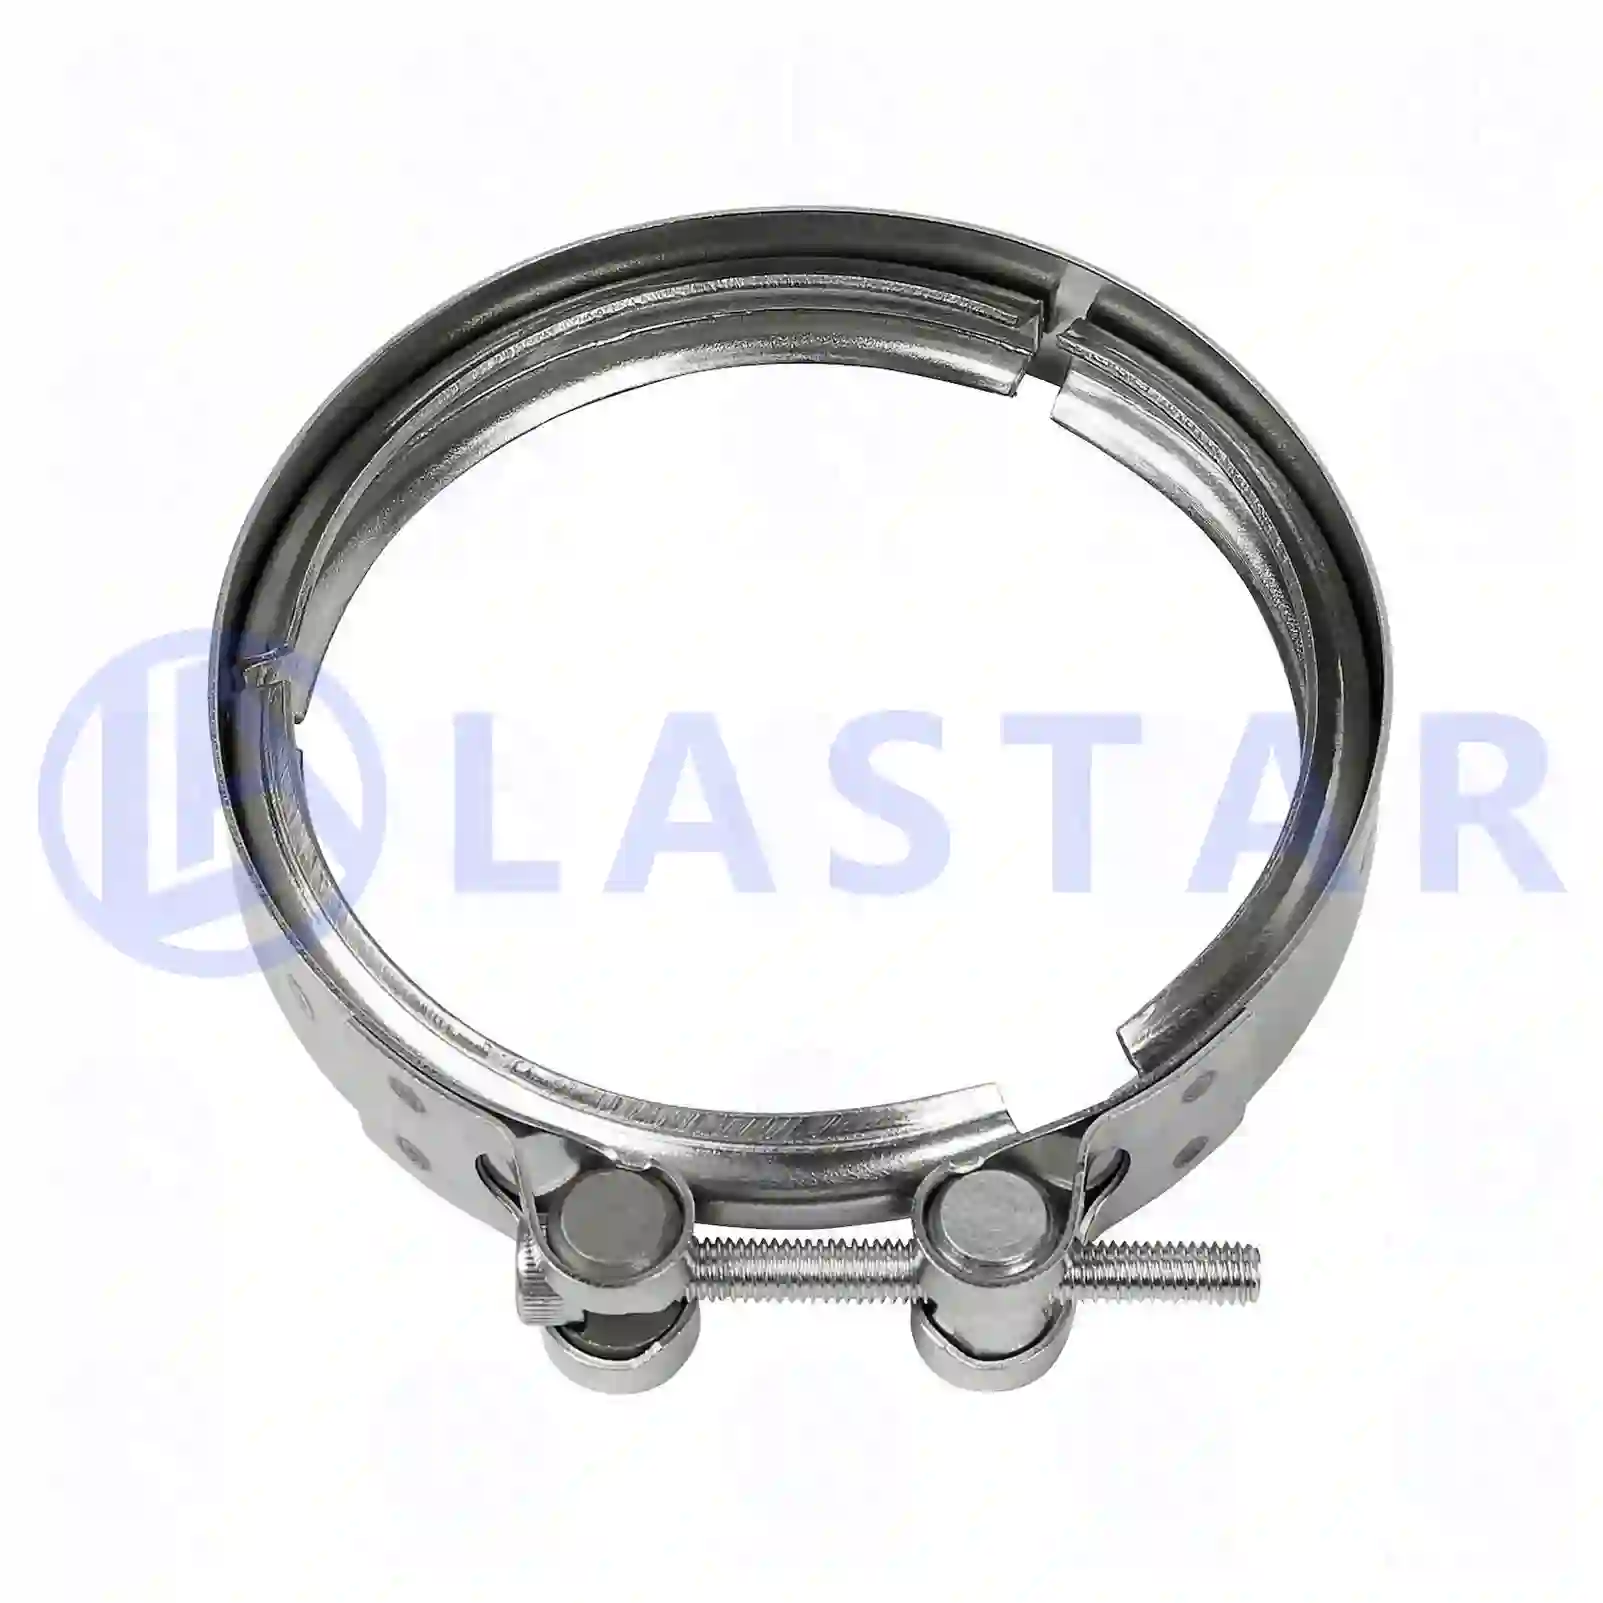 Clamp, 77709769, 1352704, 1391051, 1439823, 1445398, ZG00322-0008 ||  77709769 Lastar Spare Part | Truck Spare Parts, Auotomotive Spare Parts Clamp, 77709769, 1352704, 1391051, 1439823, 1445398, ZG00322-0008 ||  77709769 Lastar Spare Part | Truck Spare Parts, Auotomotive Spare Parts